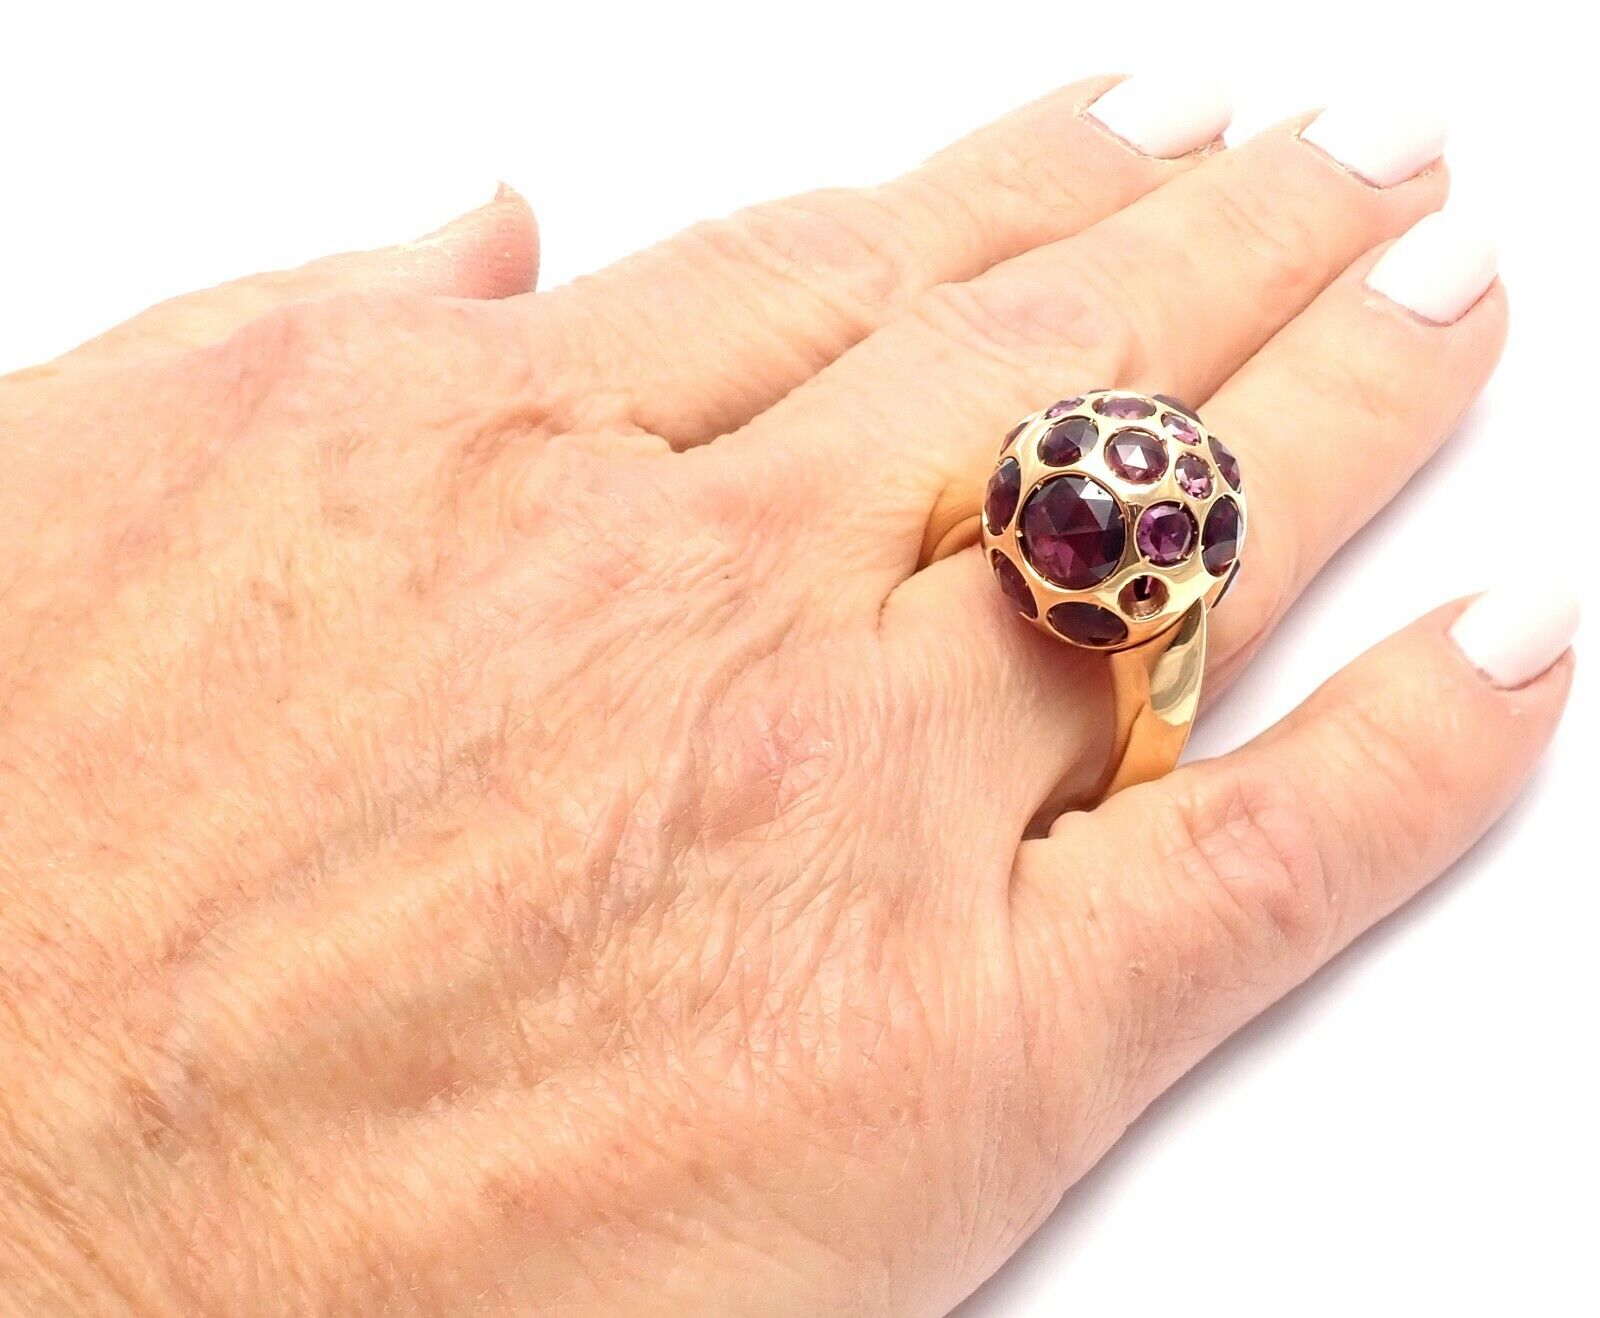 Fortrove Jewelry & Watches:Fine Jewelry:Rings New! Pomellato Harem 18k Rose Gold Rhodolite Garnet Ring Box/Papers